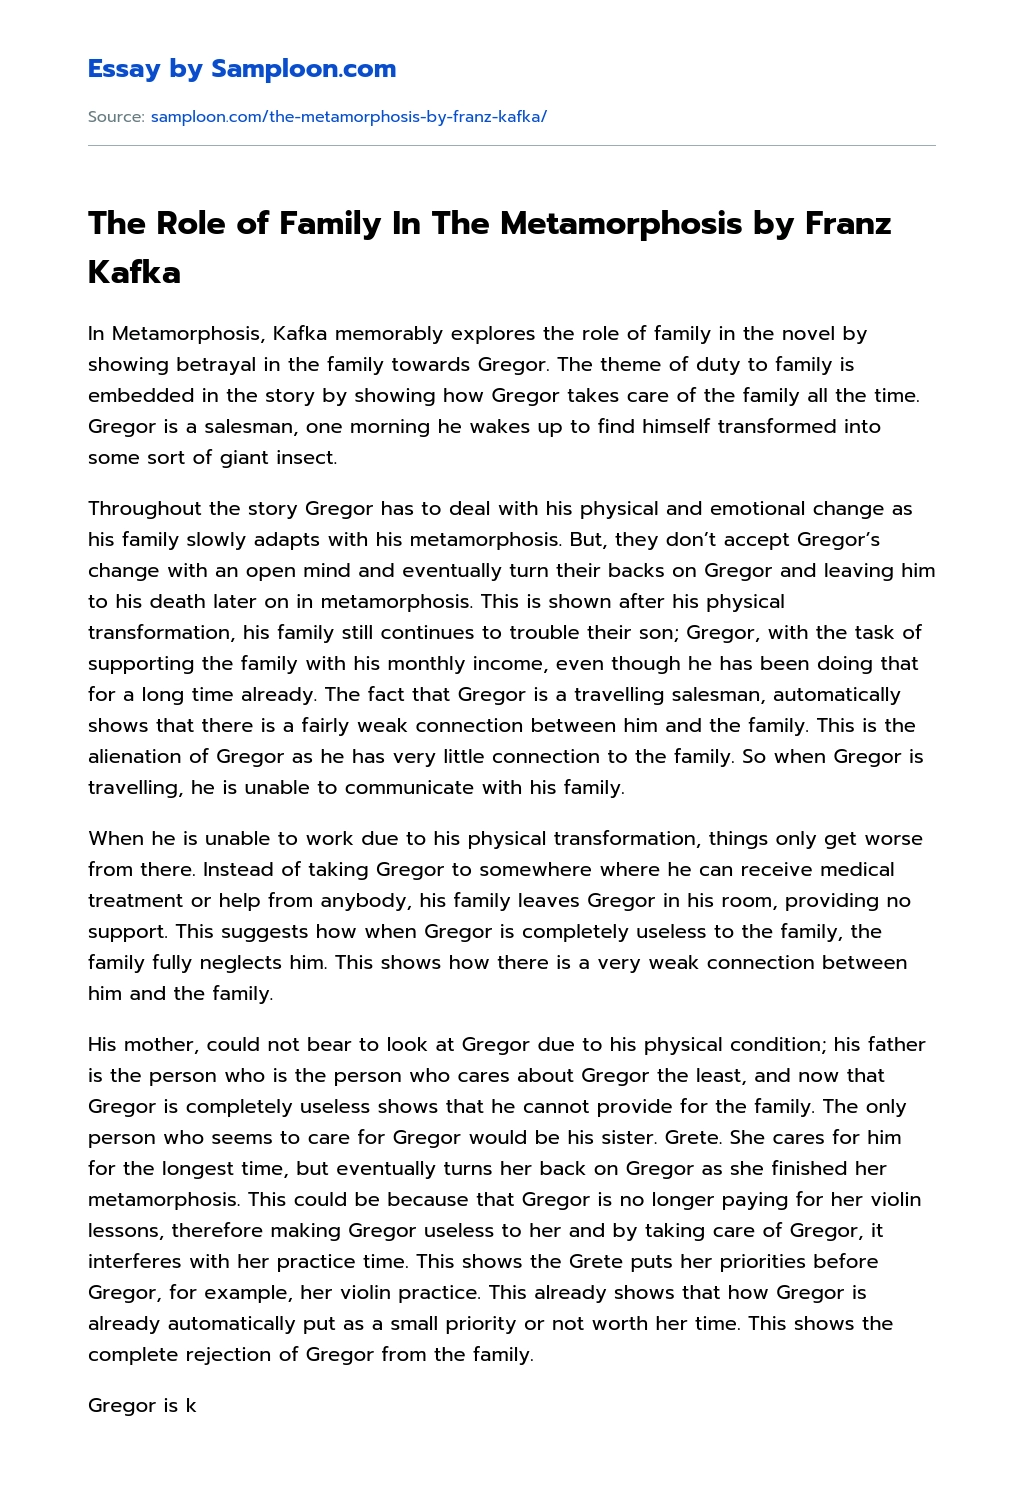 The Role of Family In The Metamorphosis by Franz Kafka essay